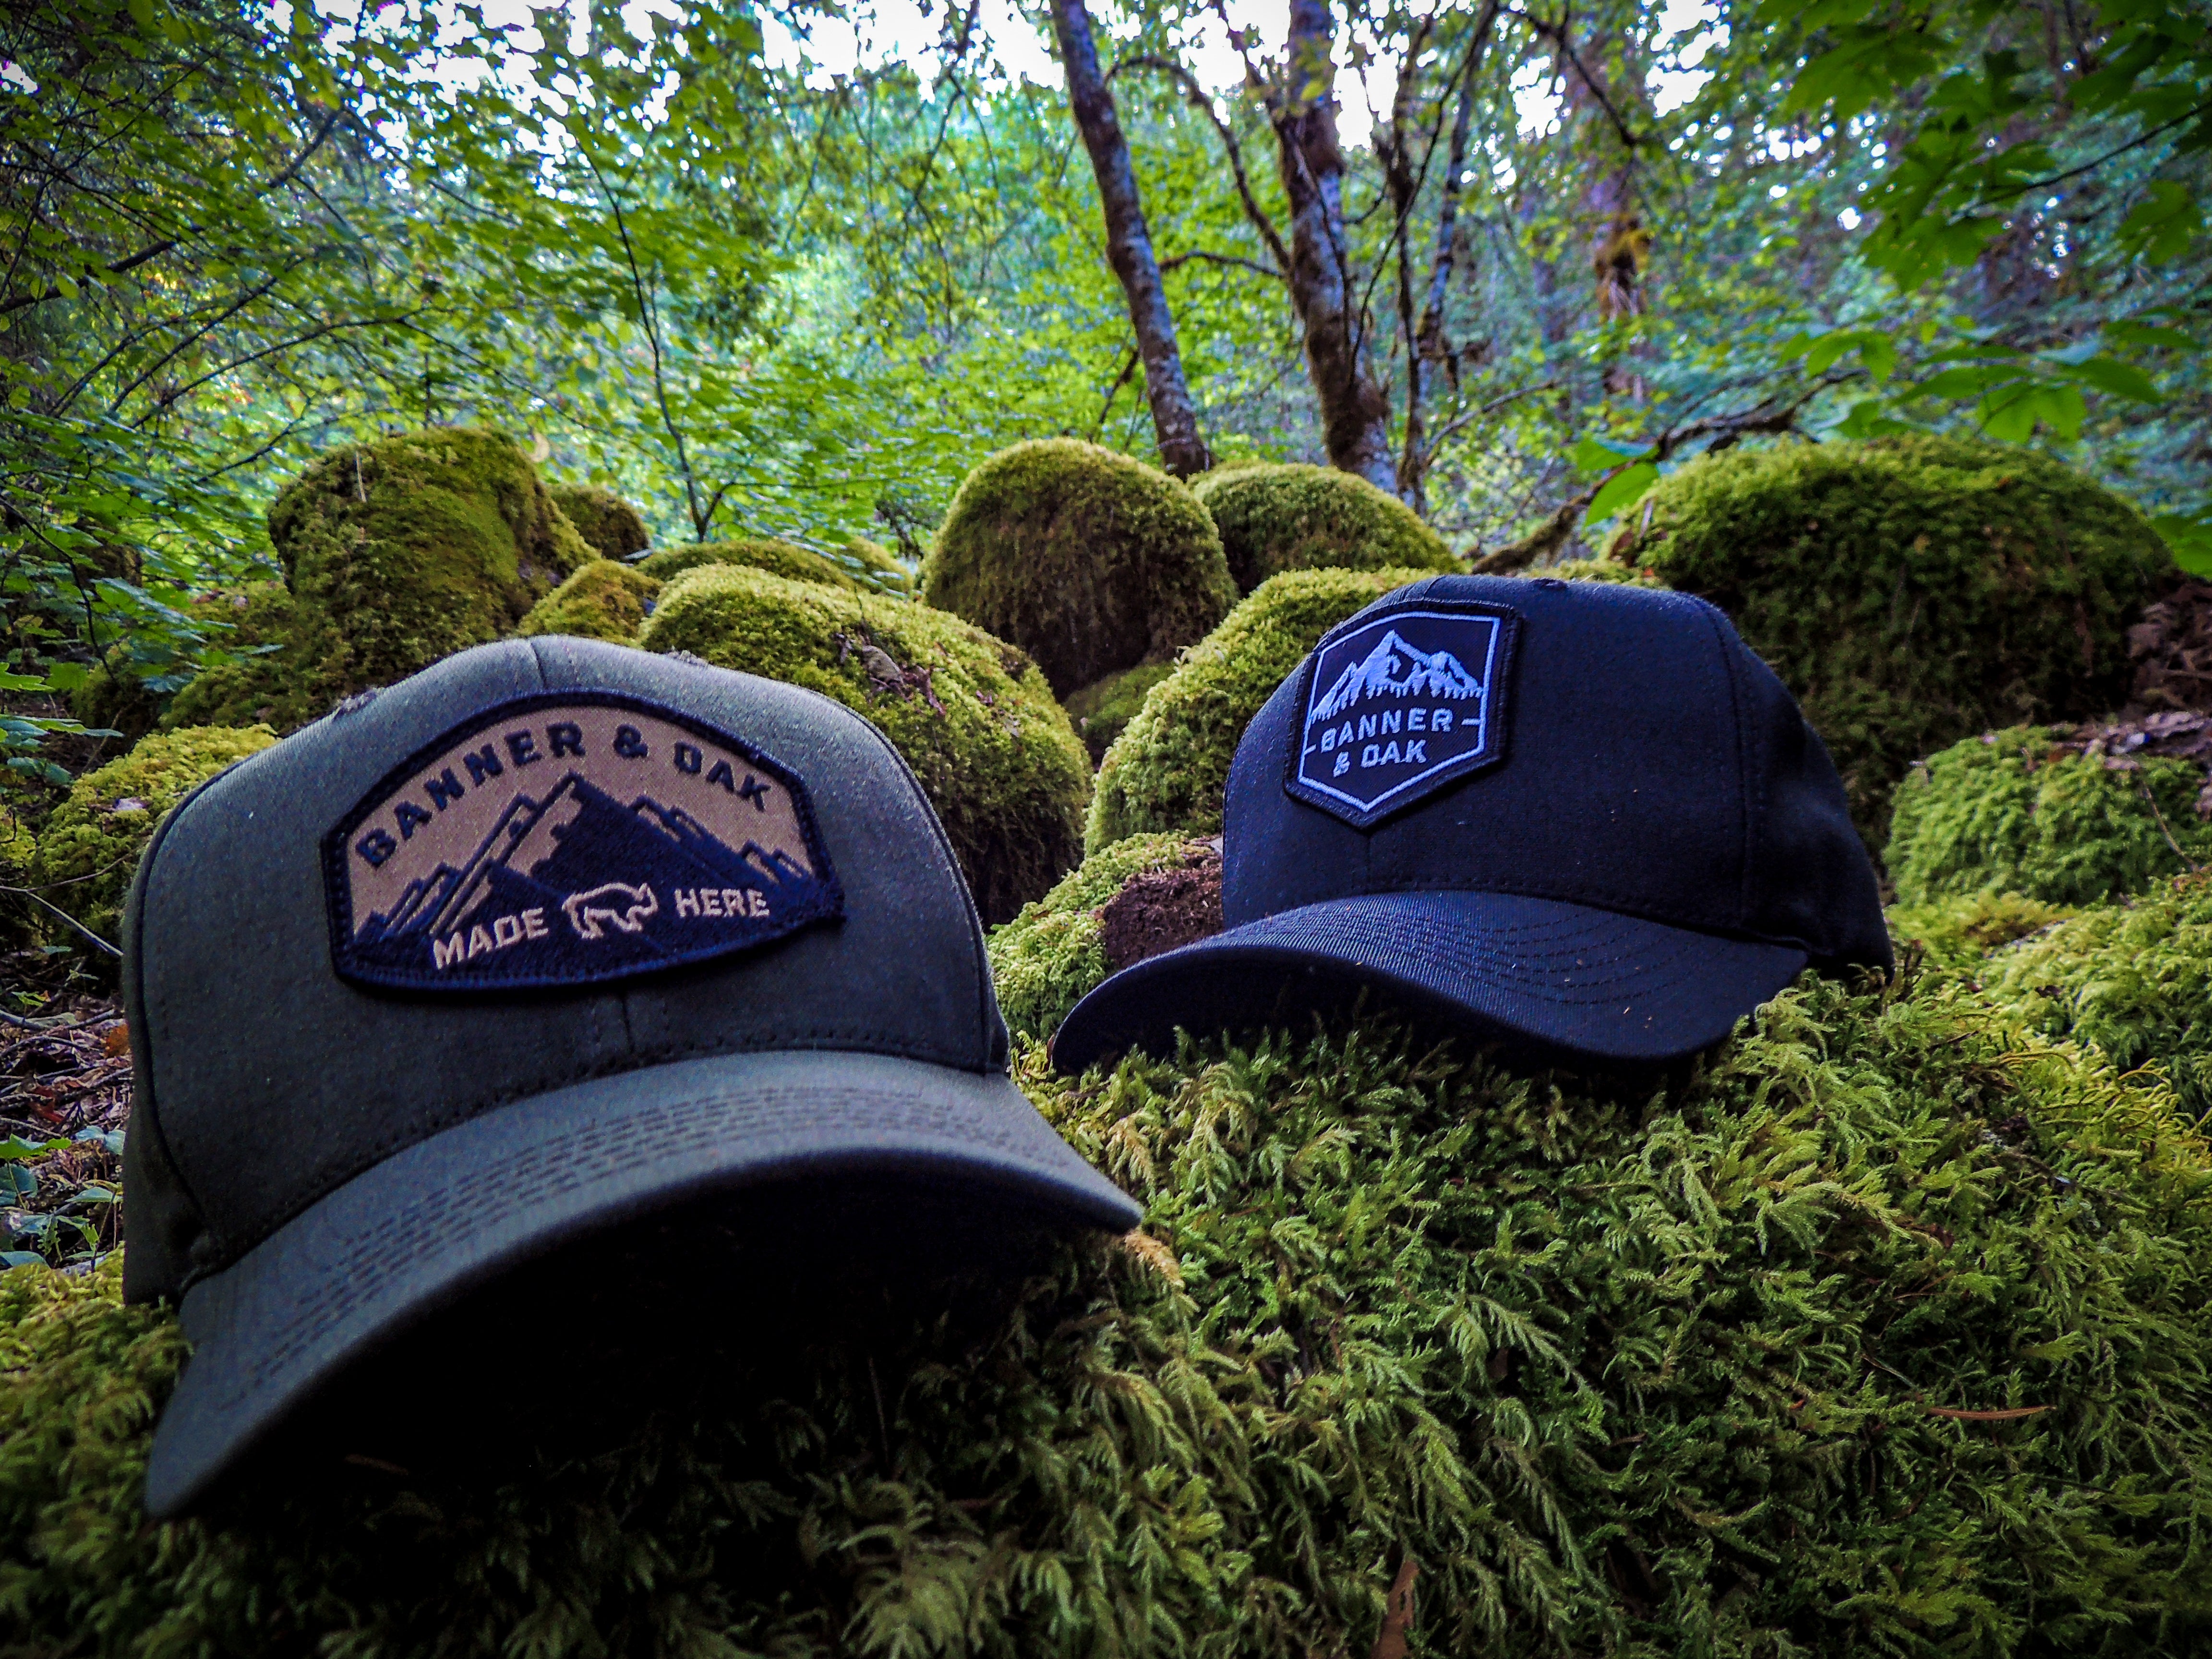 Sierra and Nebo hats from Banner and Oak